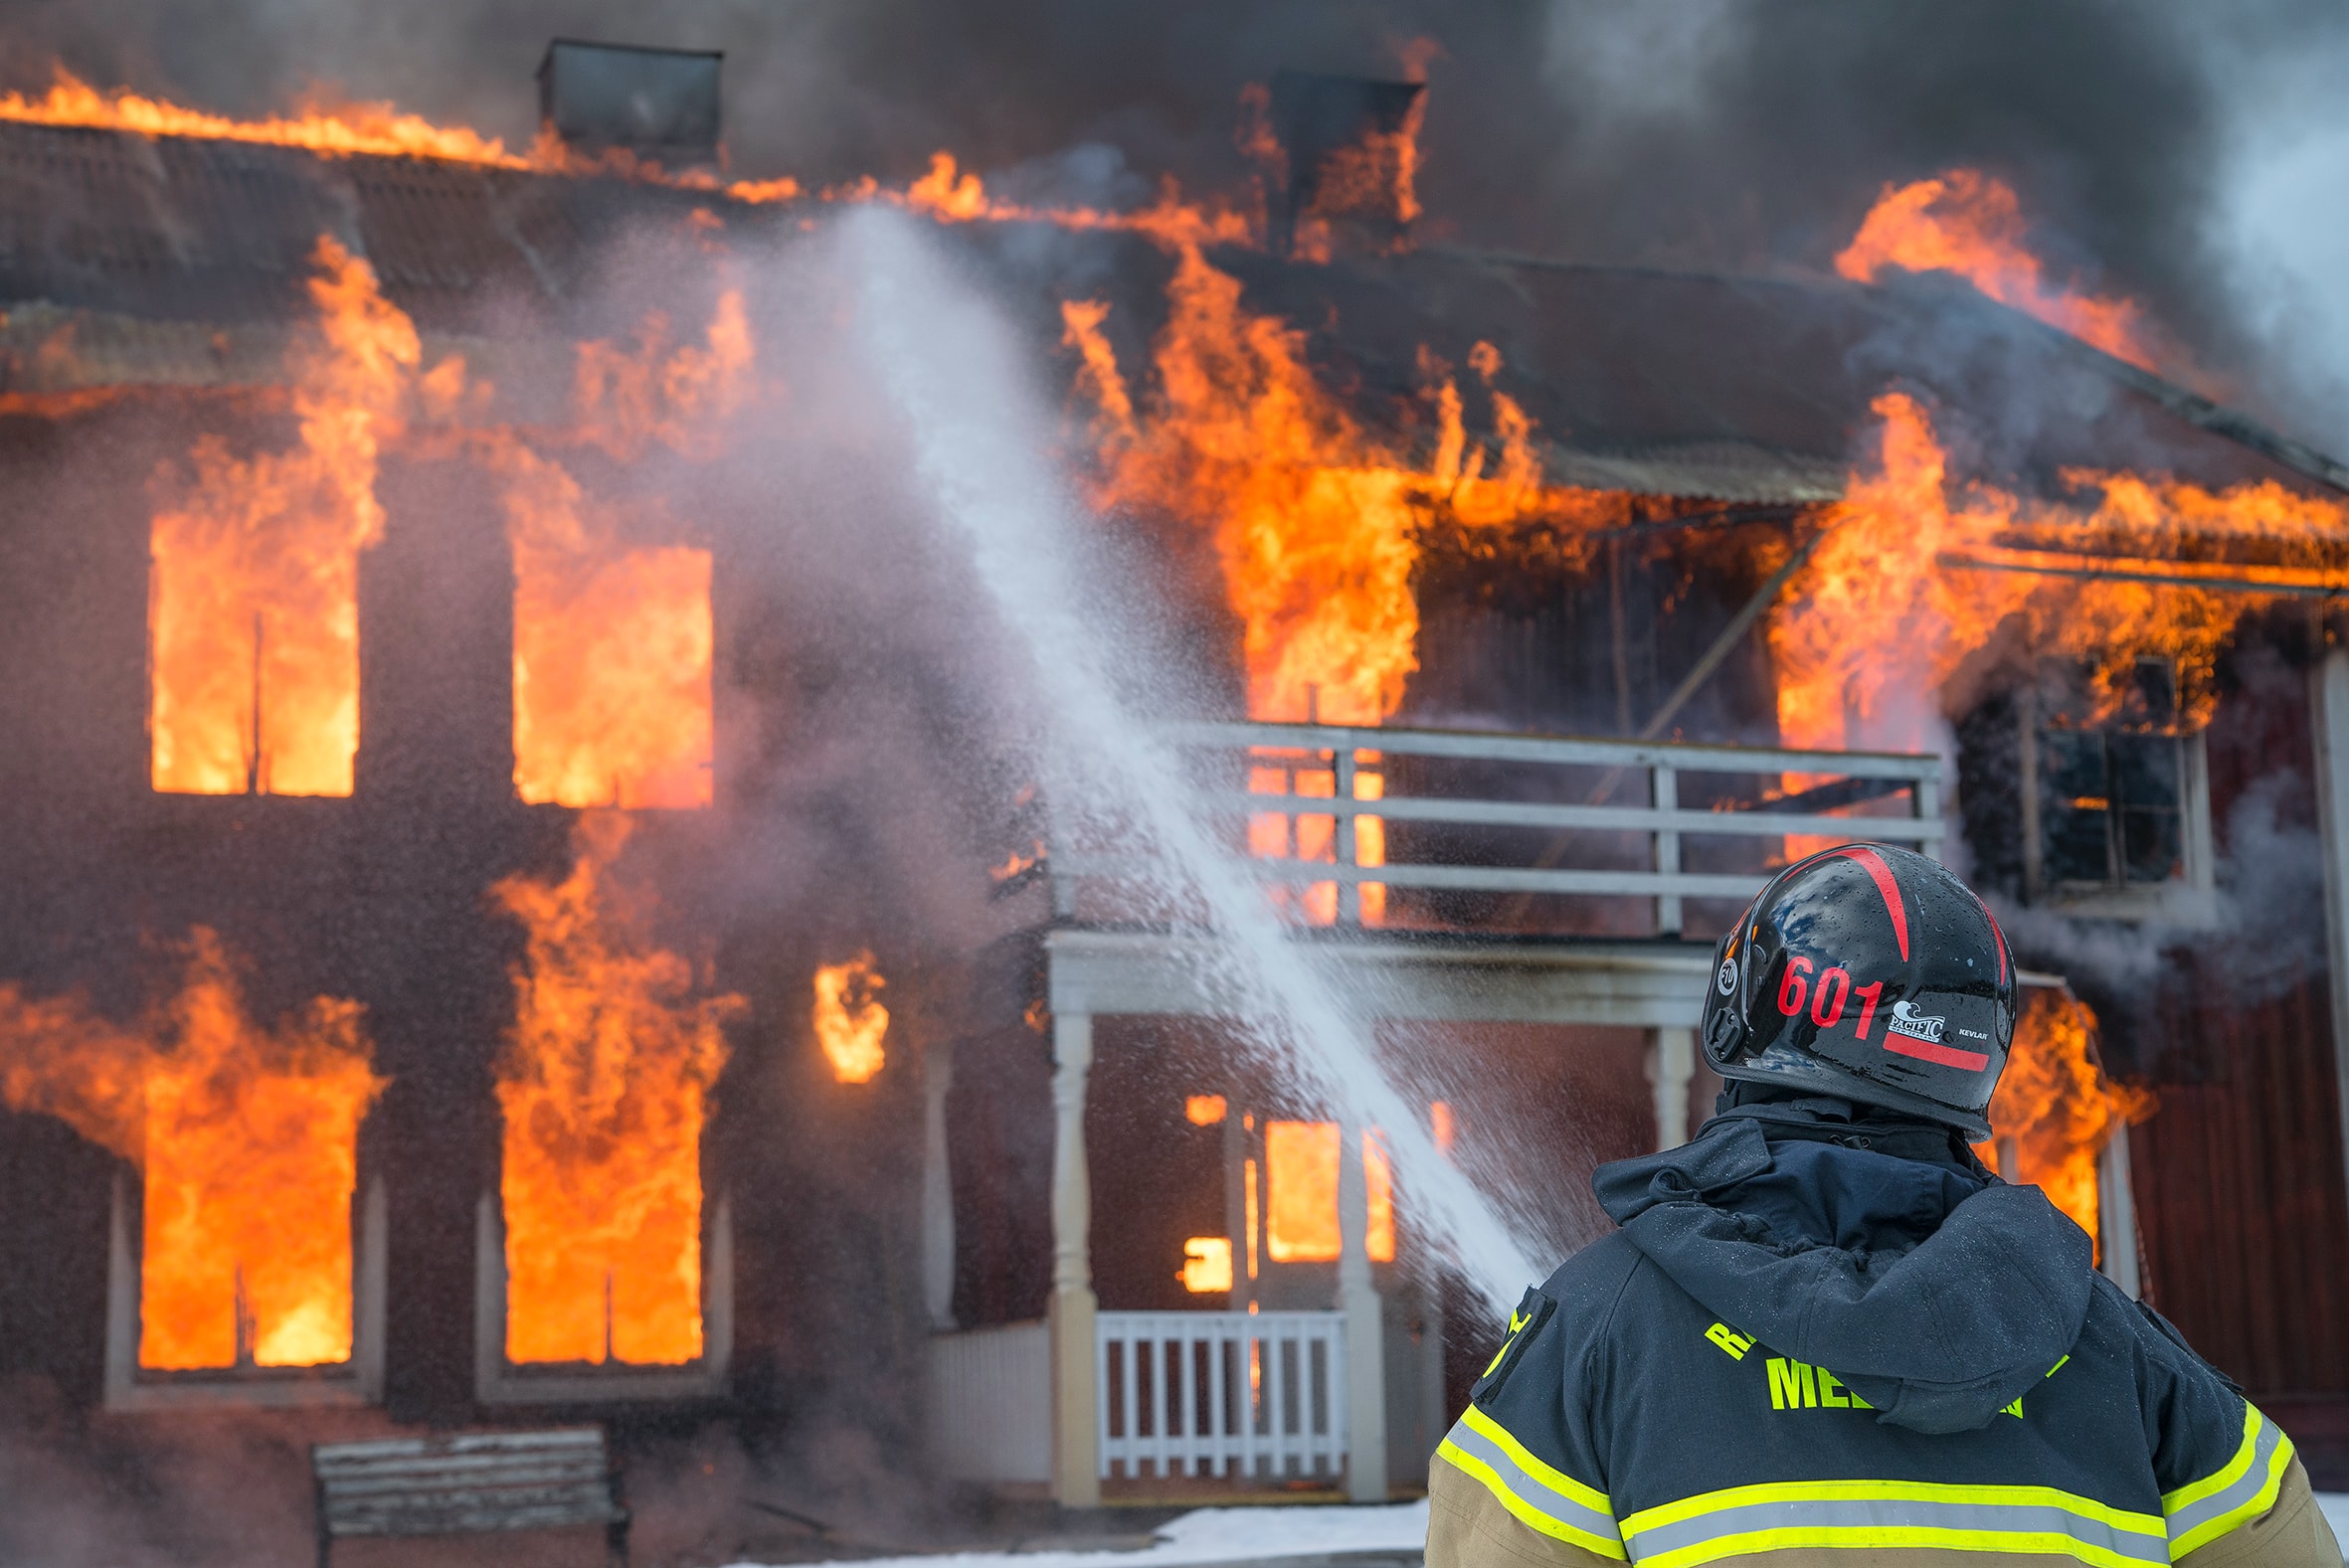 A fire fighter uses a water hose to battle a house fire.